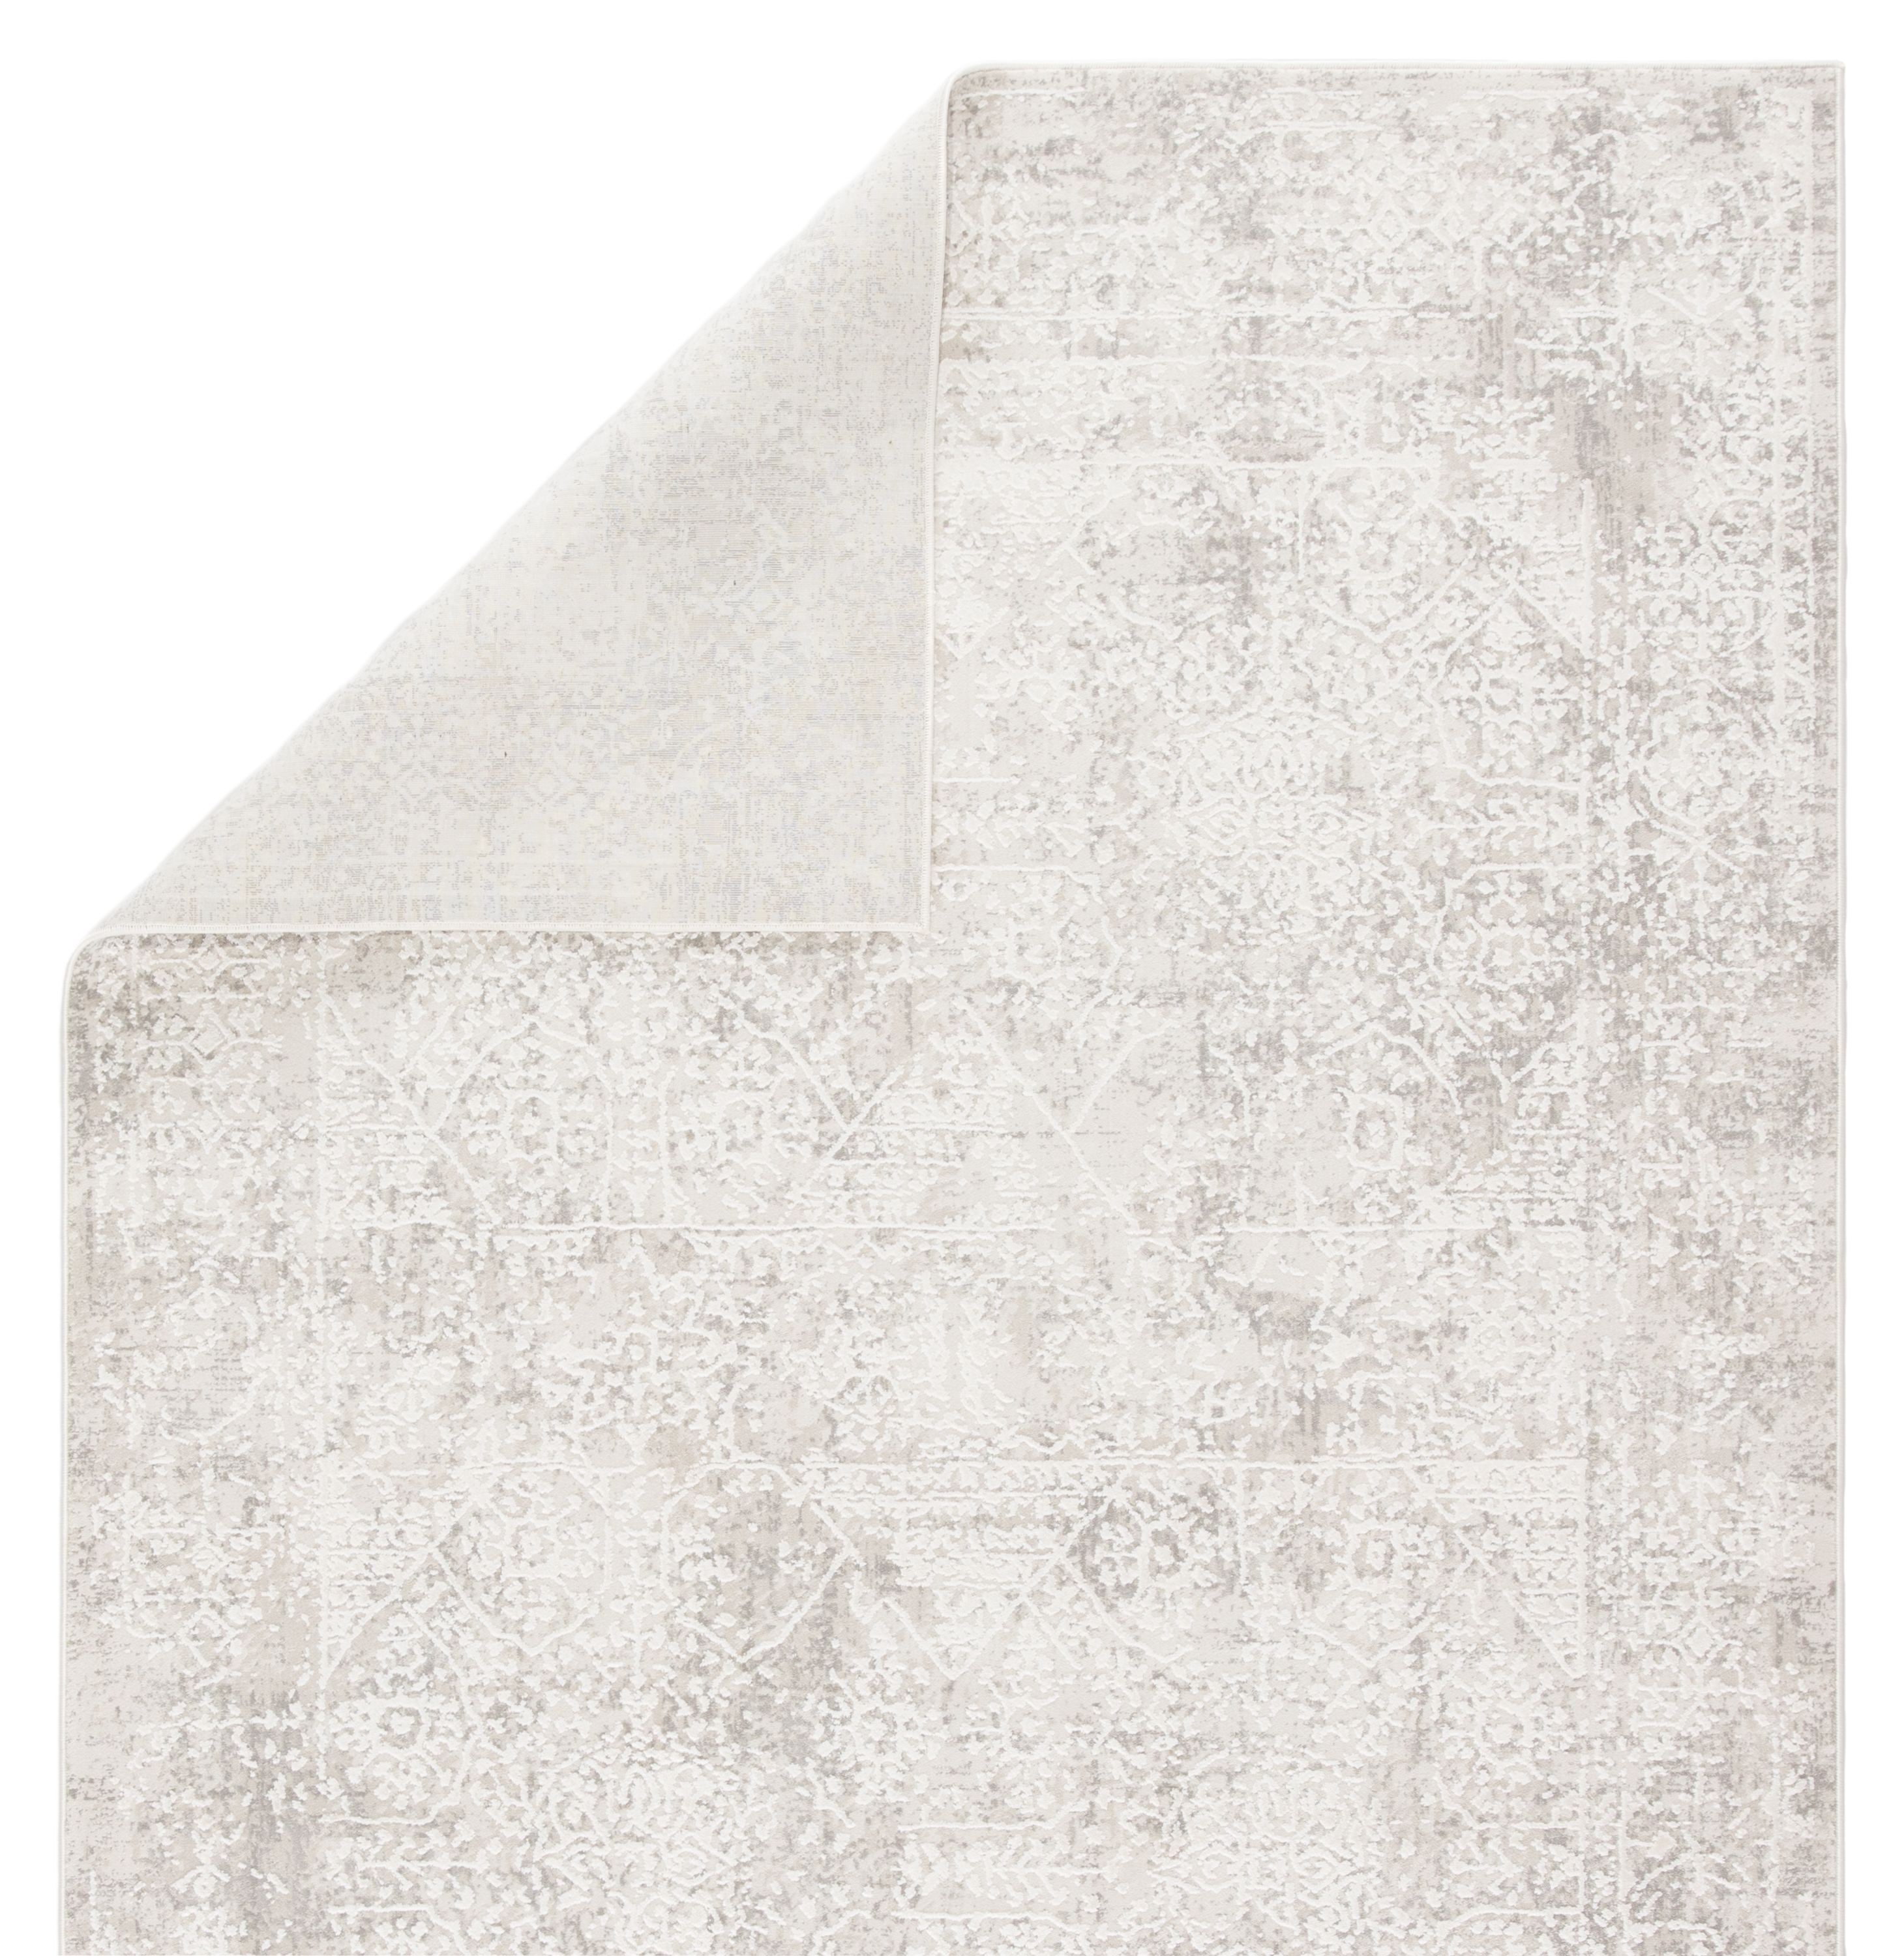 Lianna Abstract Silver/ White Area Rug (4'X6') - Image 2